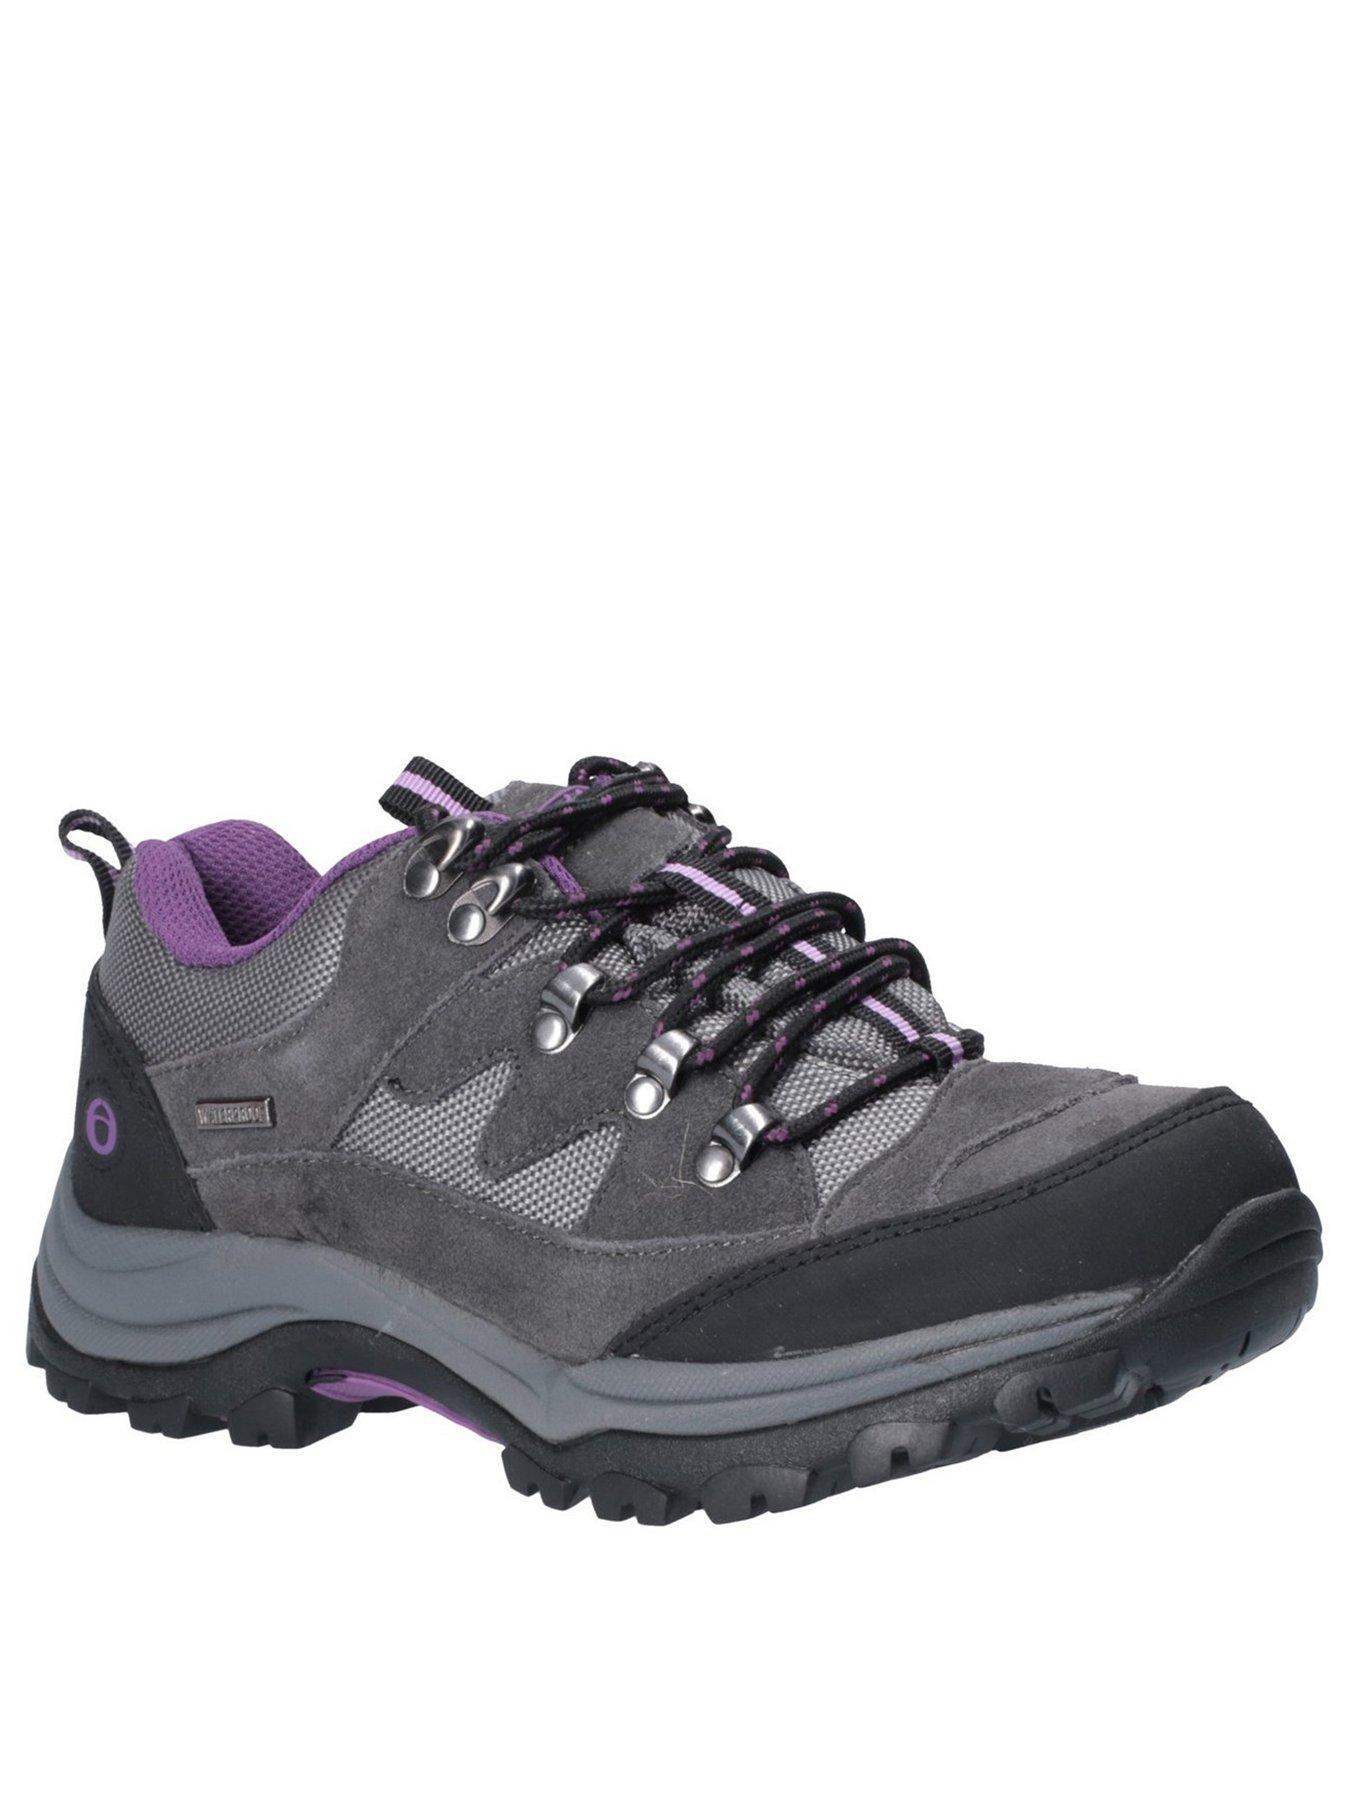 Trainers Oxerton Walking Trainer - Grey